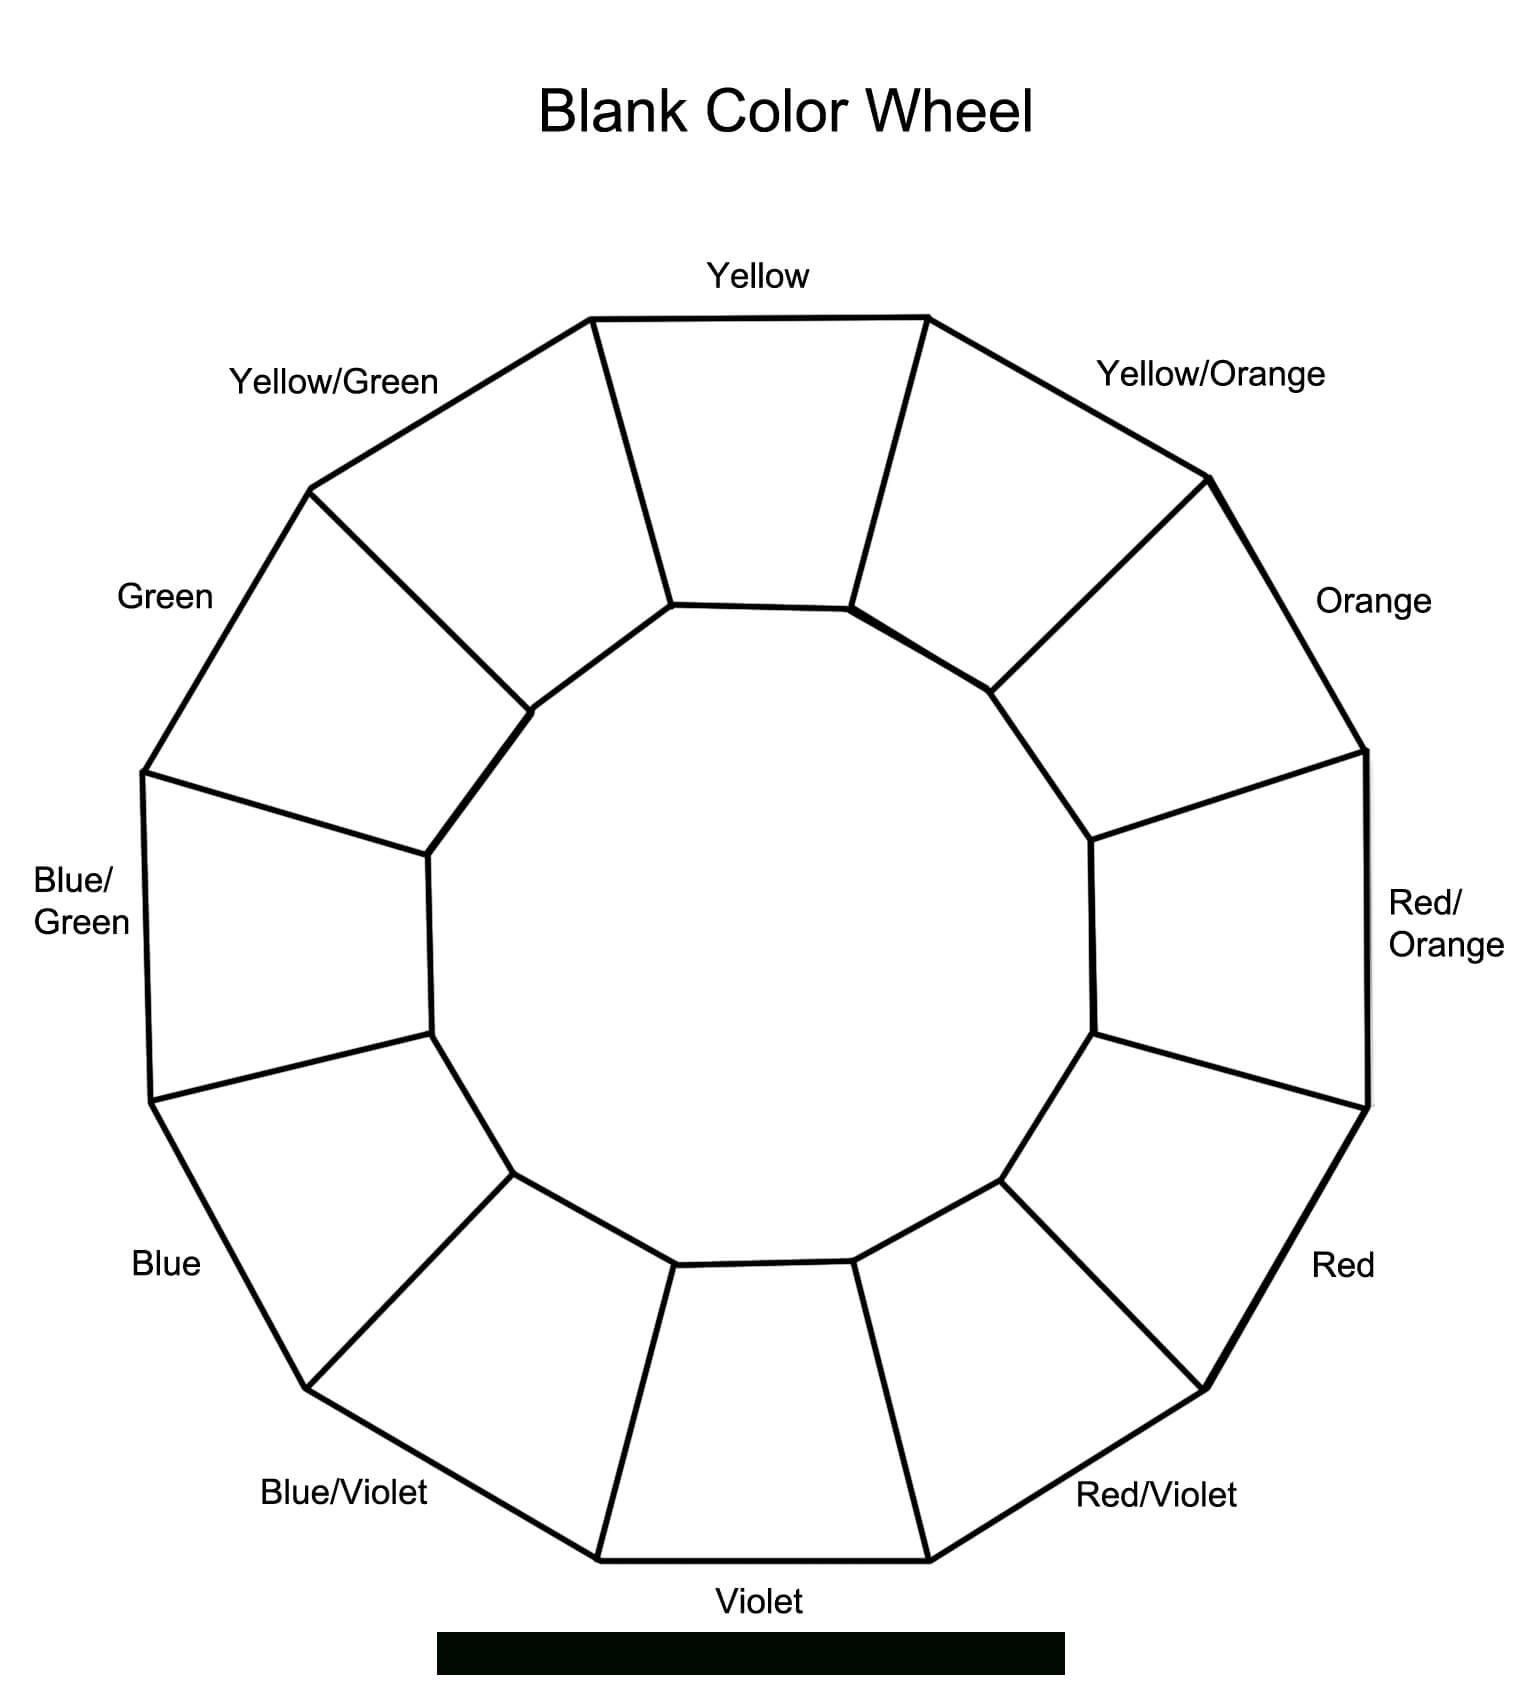 12 Section Colour Wheel | Free Pictures | Painting In 2019 With Regard To Blank Color Wheel Template